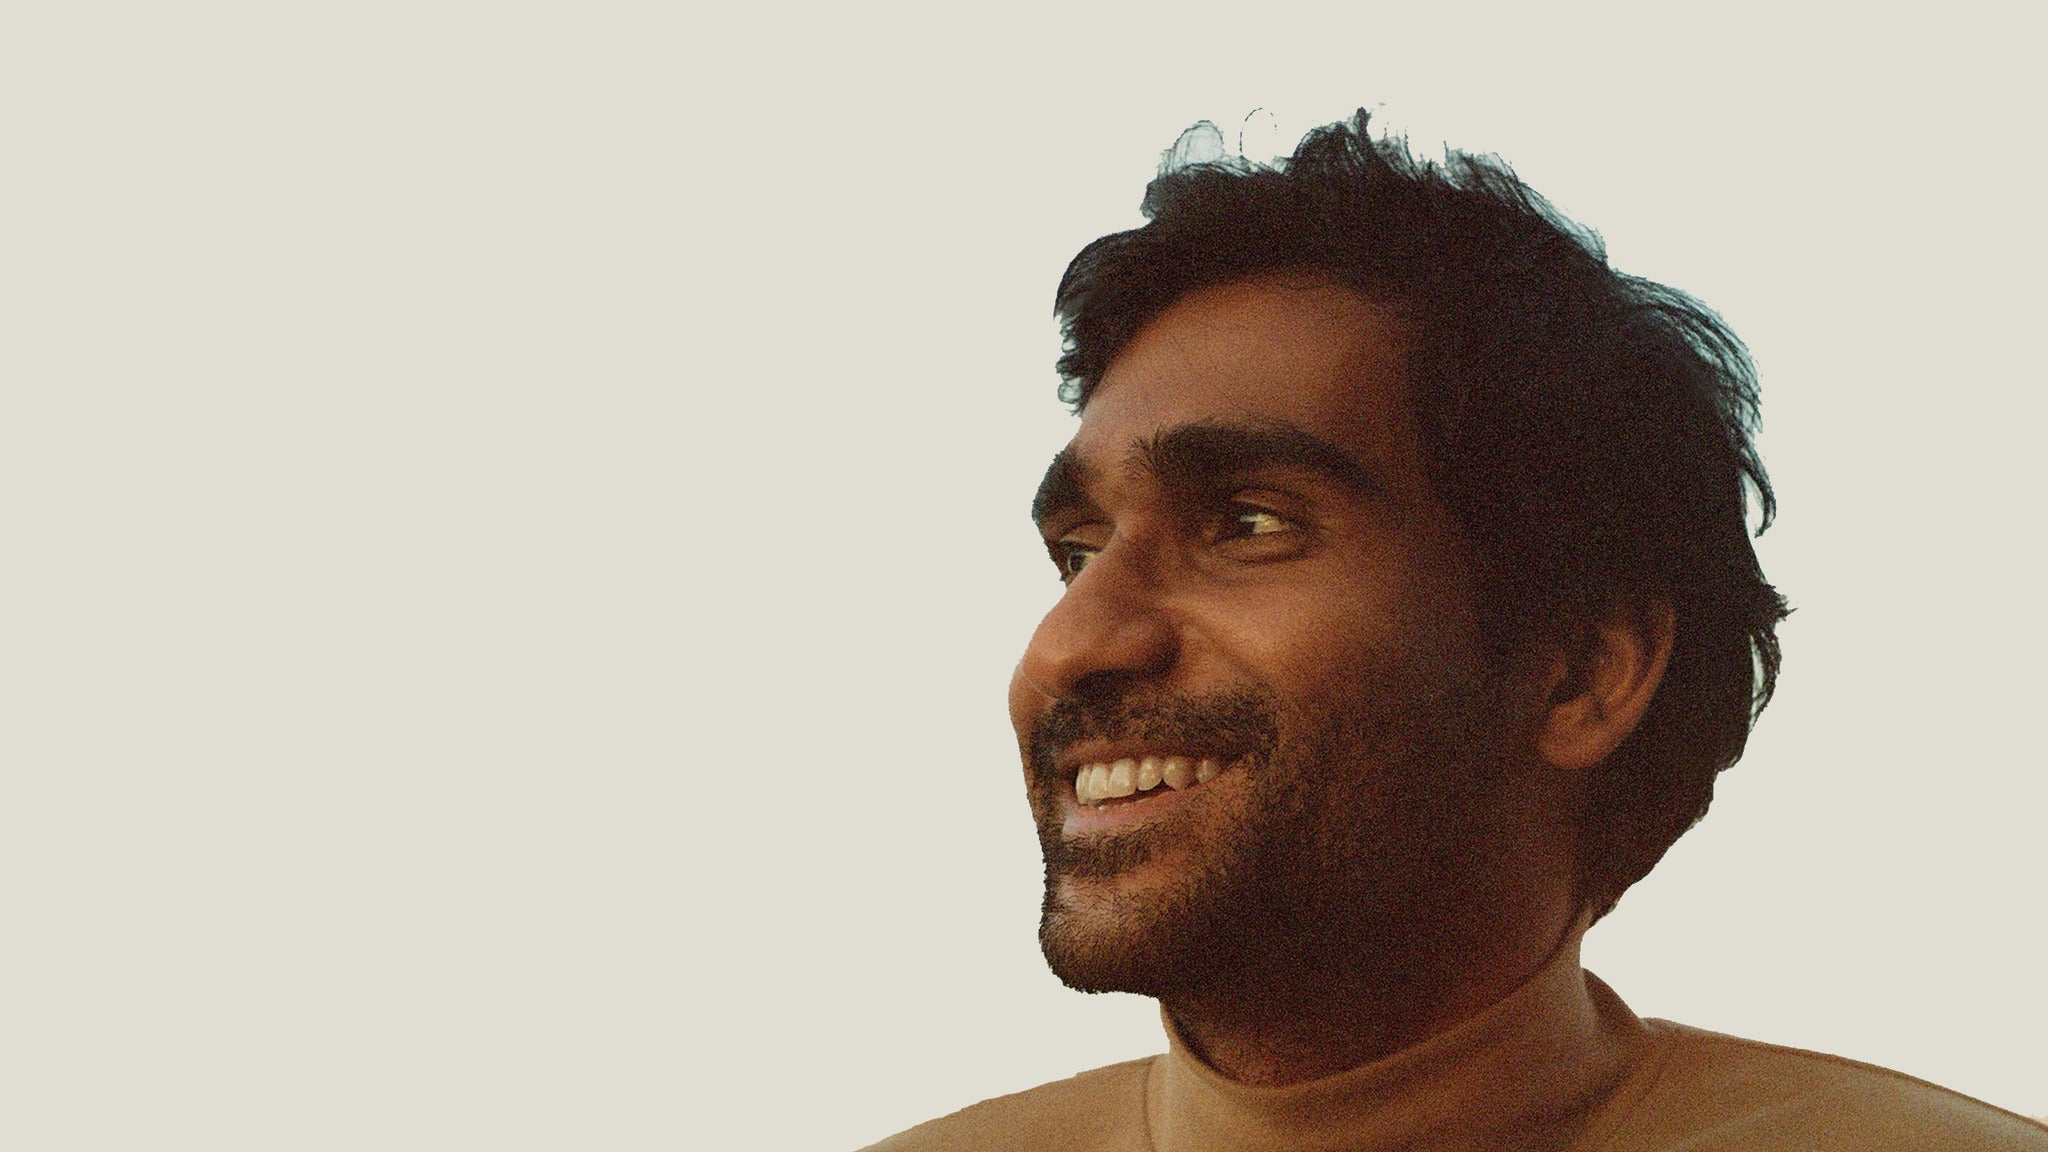 Prateek Kuhad in Somerville promo photo for VIP Package presale offer code